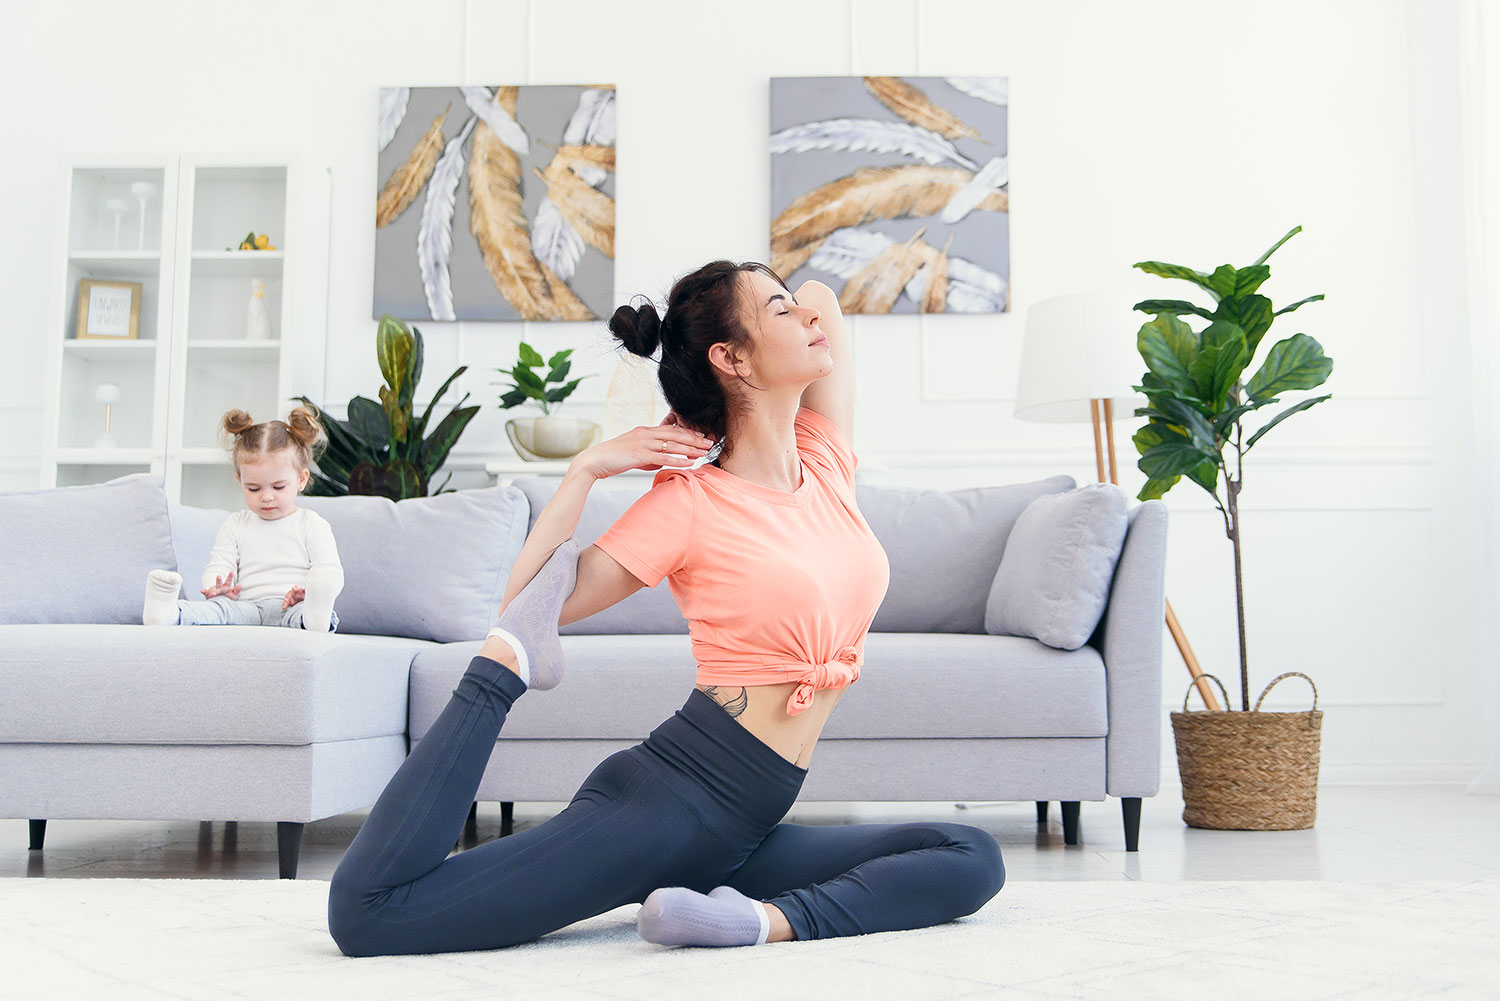 Yoga Hip Openers 12 Poses for Home Practice